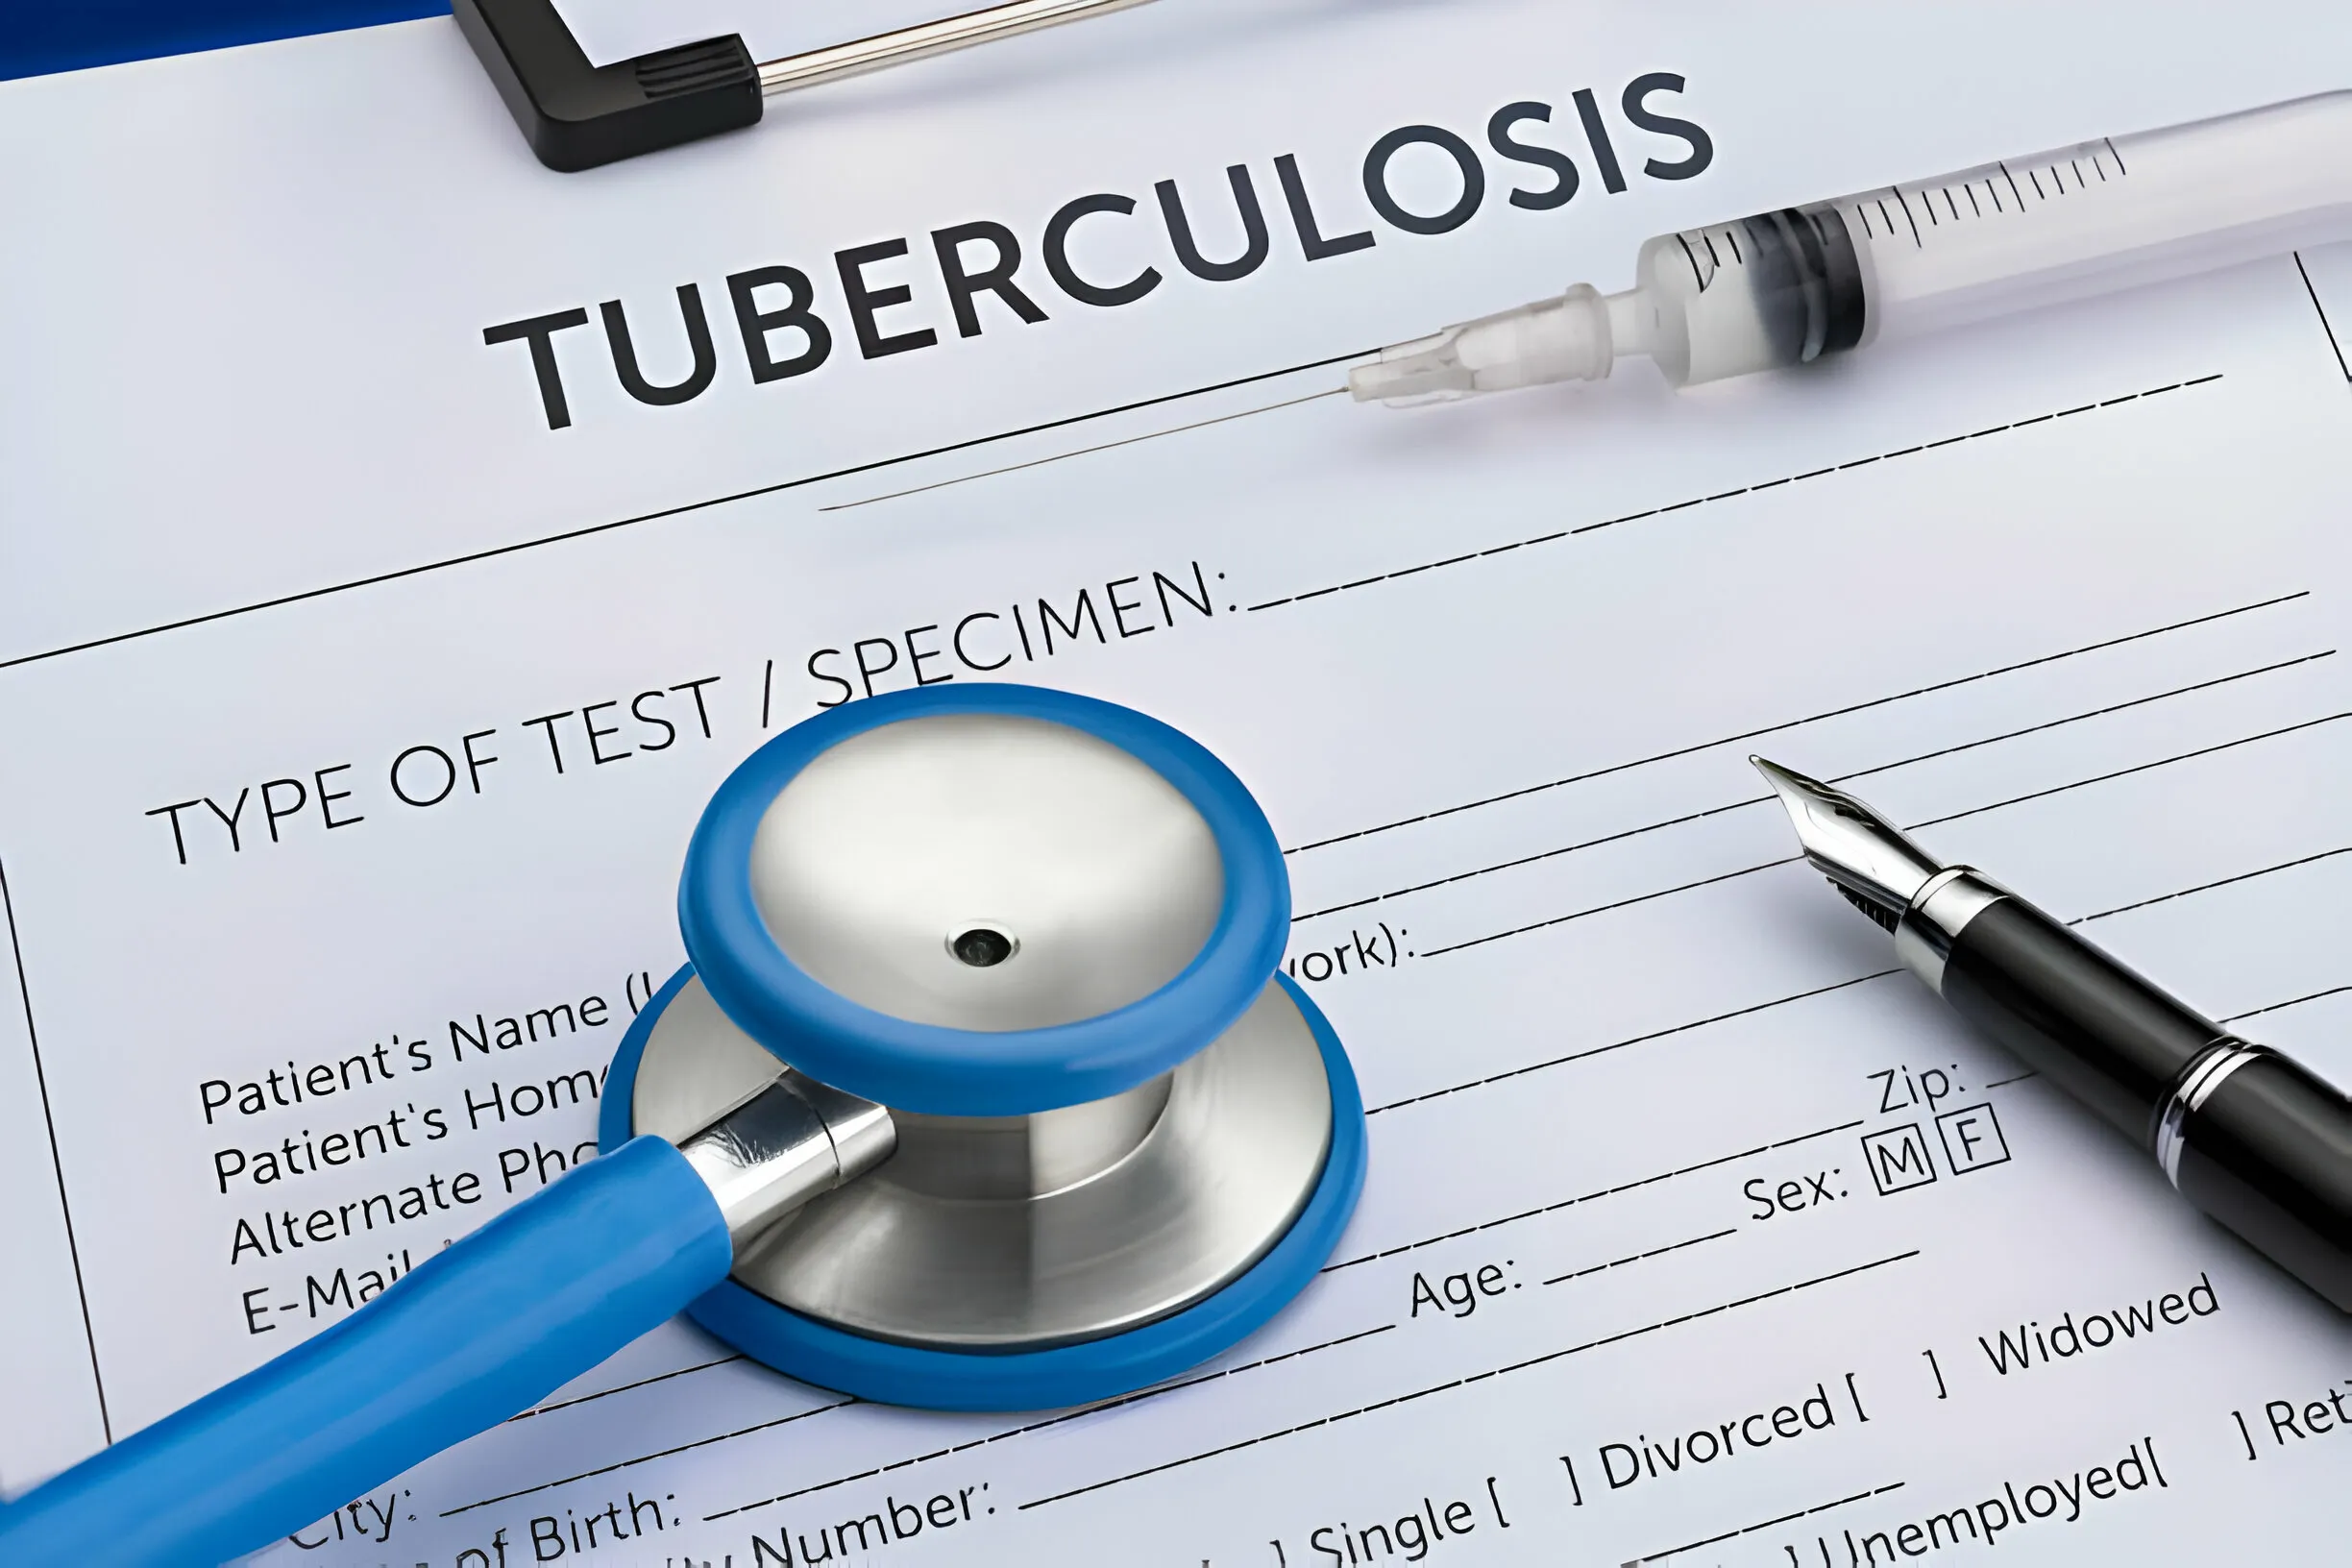 How to Book for Tuberculosis Test for UK VISA in Nigeria